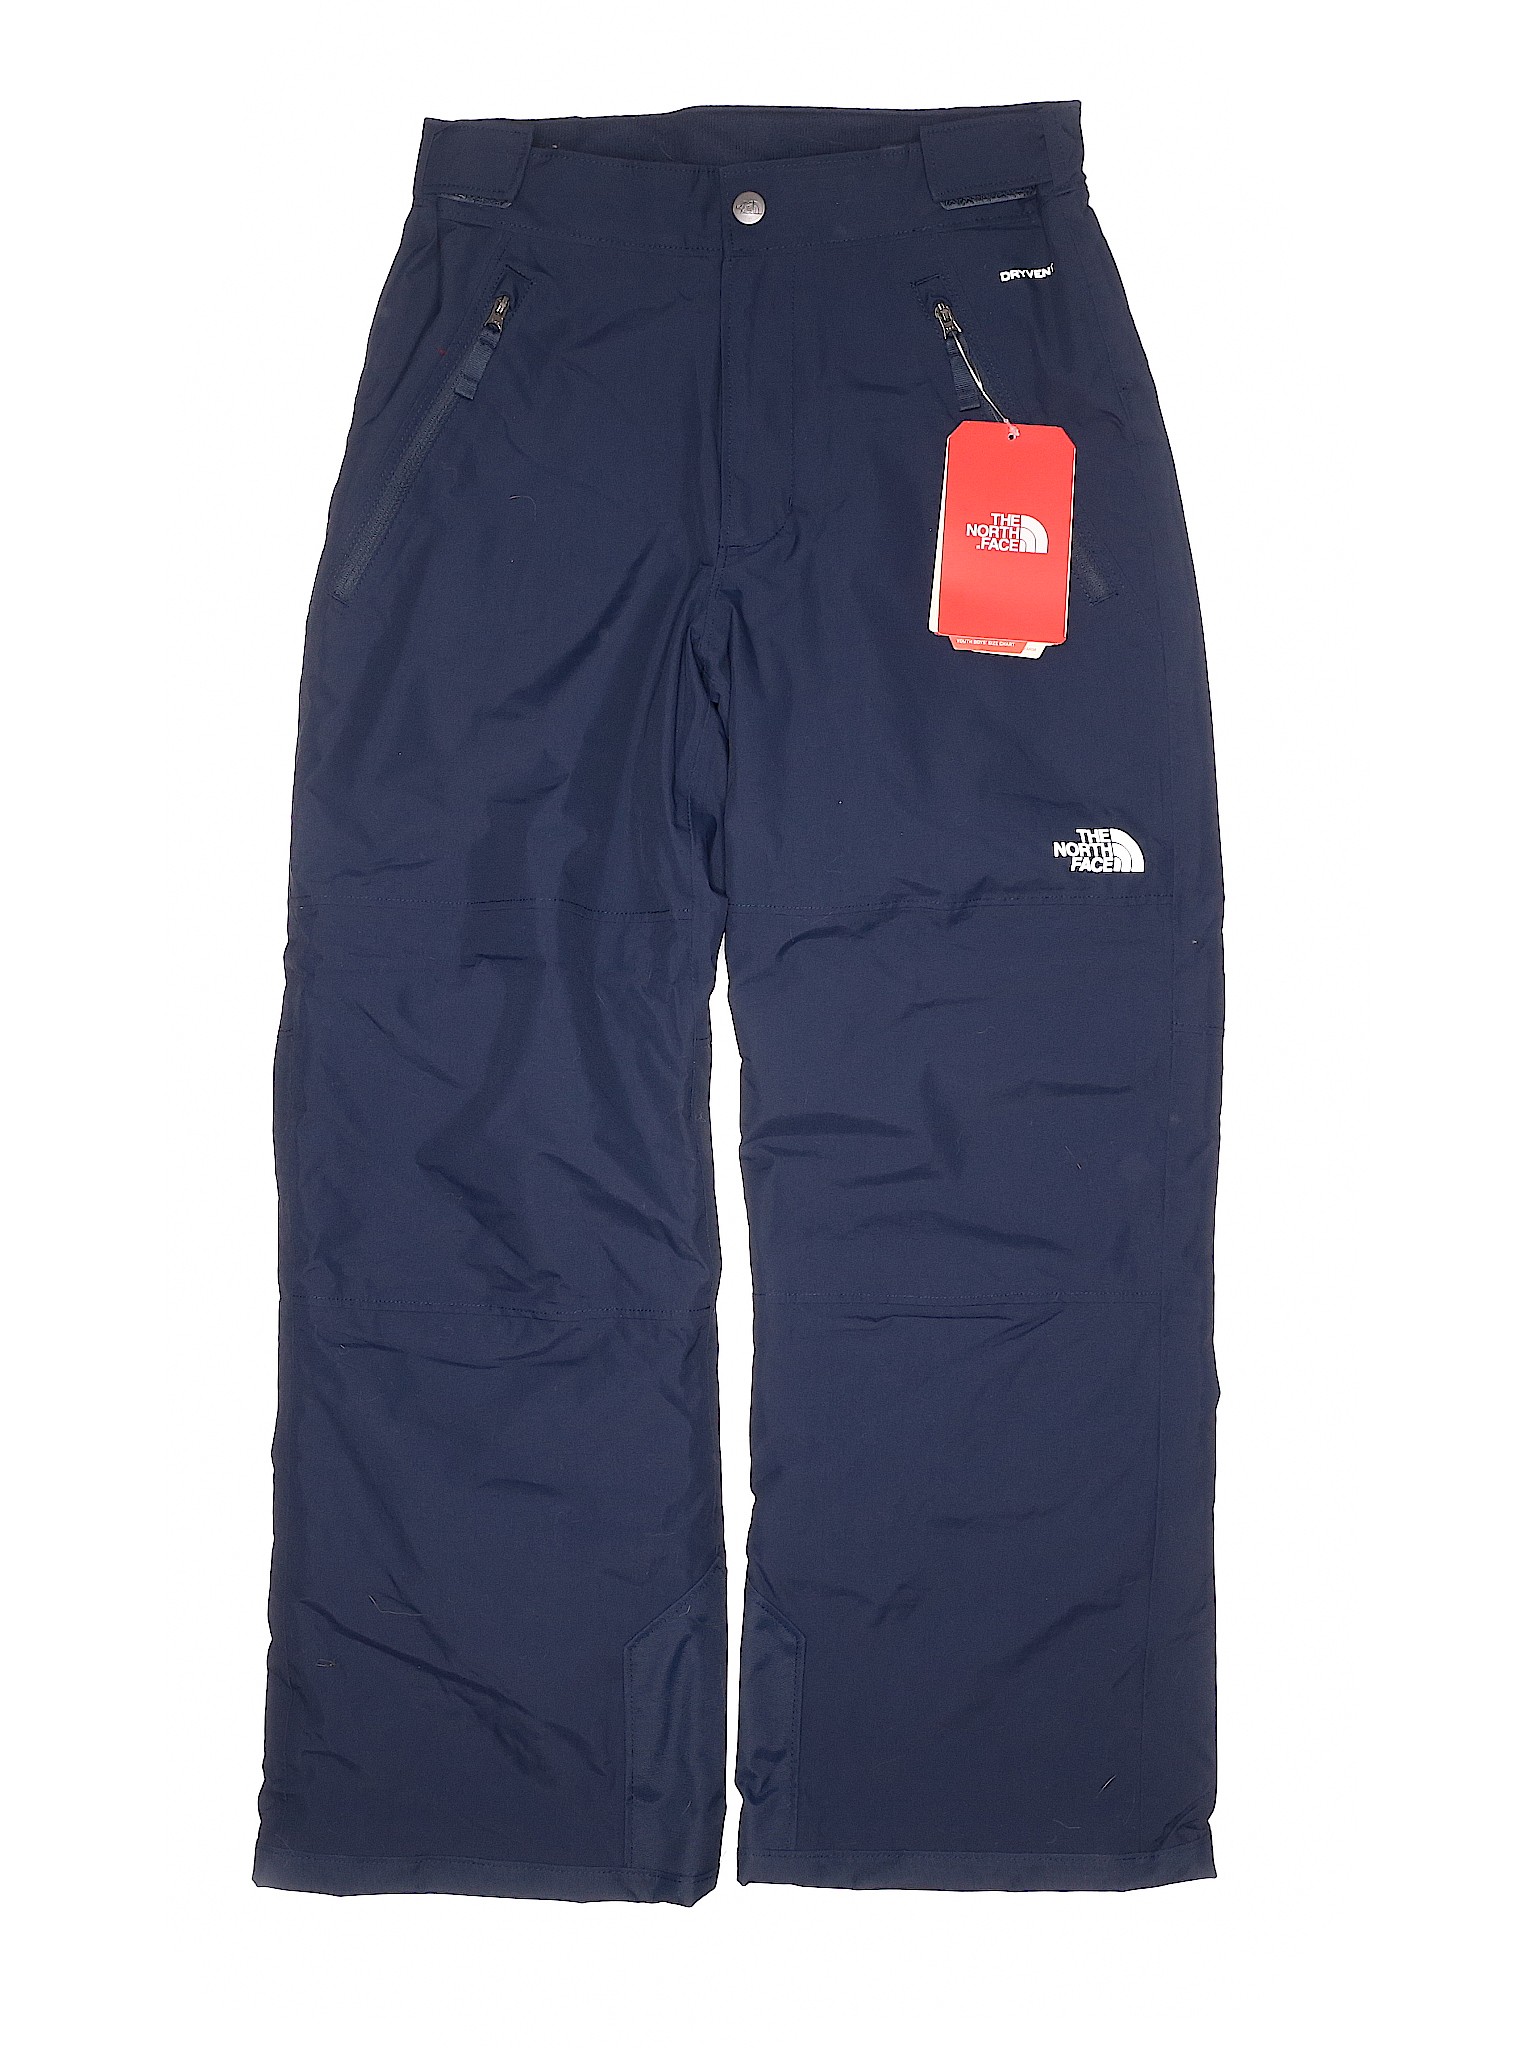 The North Face 100% Nylon Solid Blue Snow Pants Size 10 - 12 - 26% off